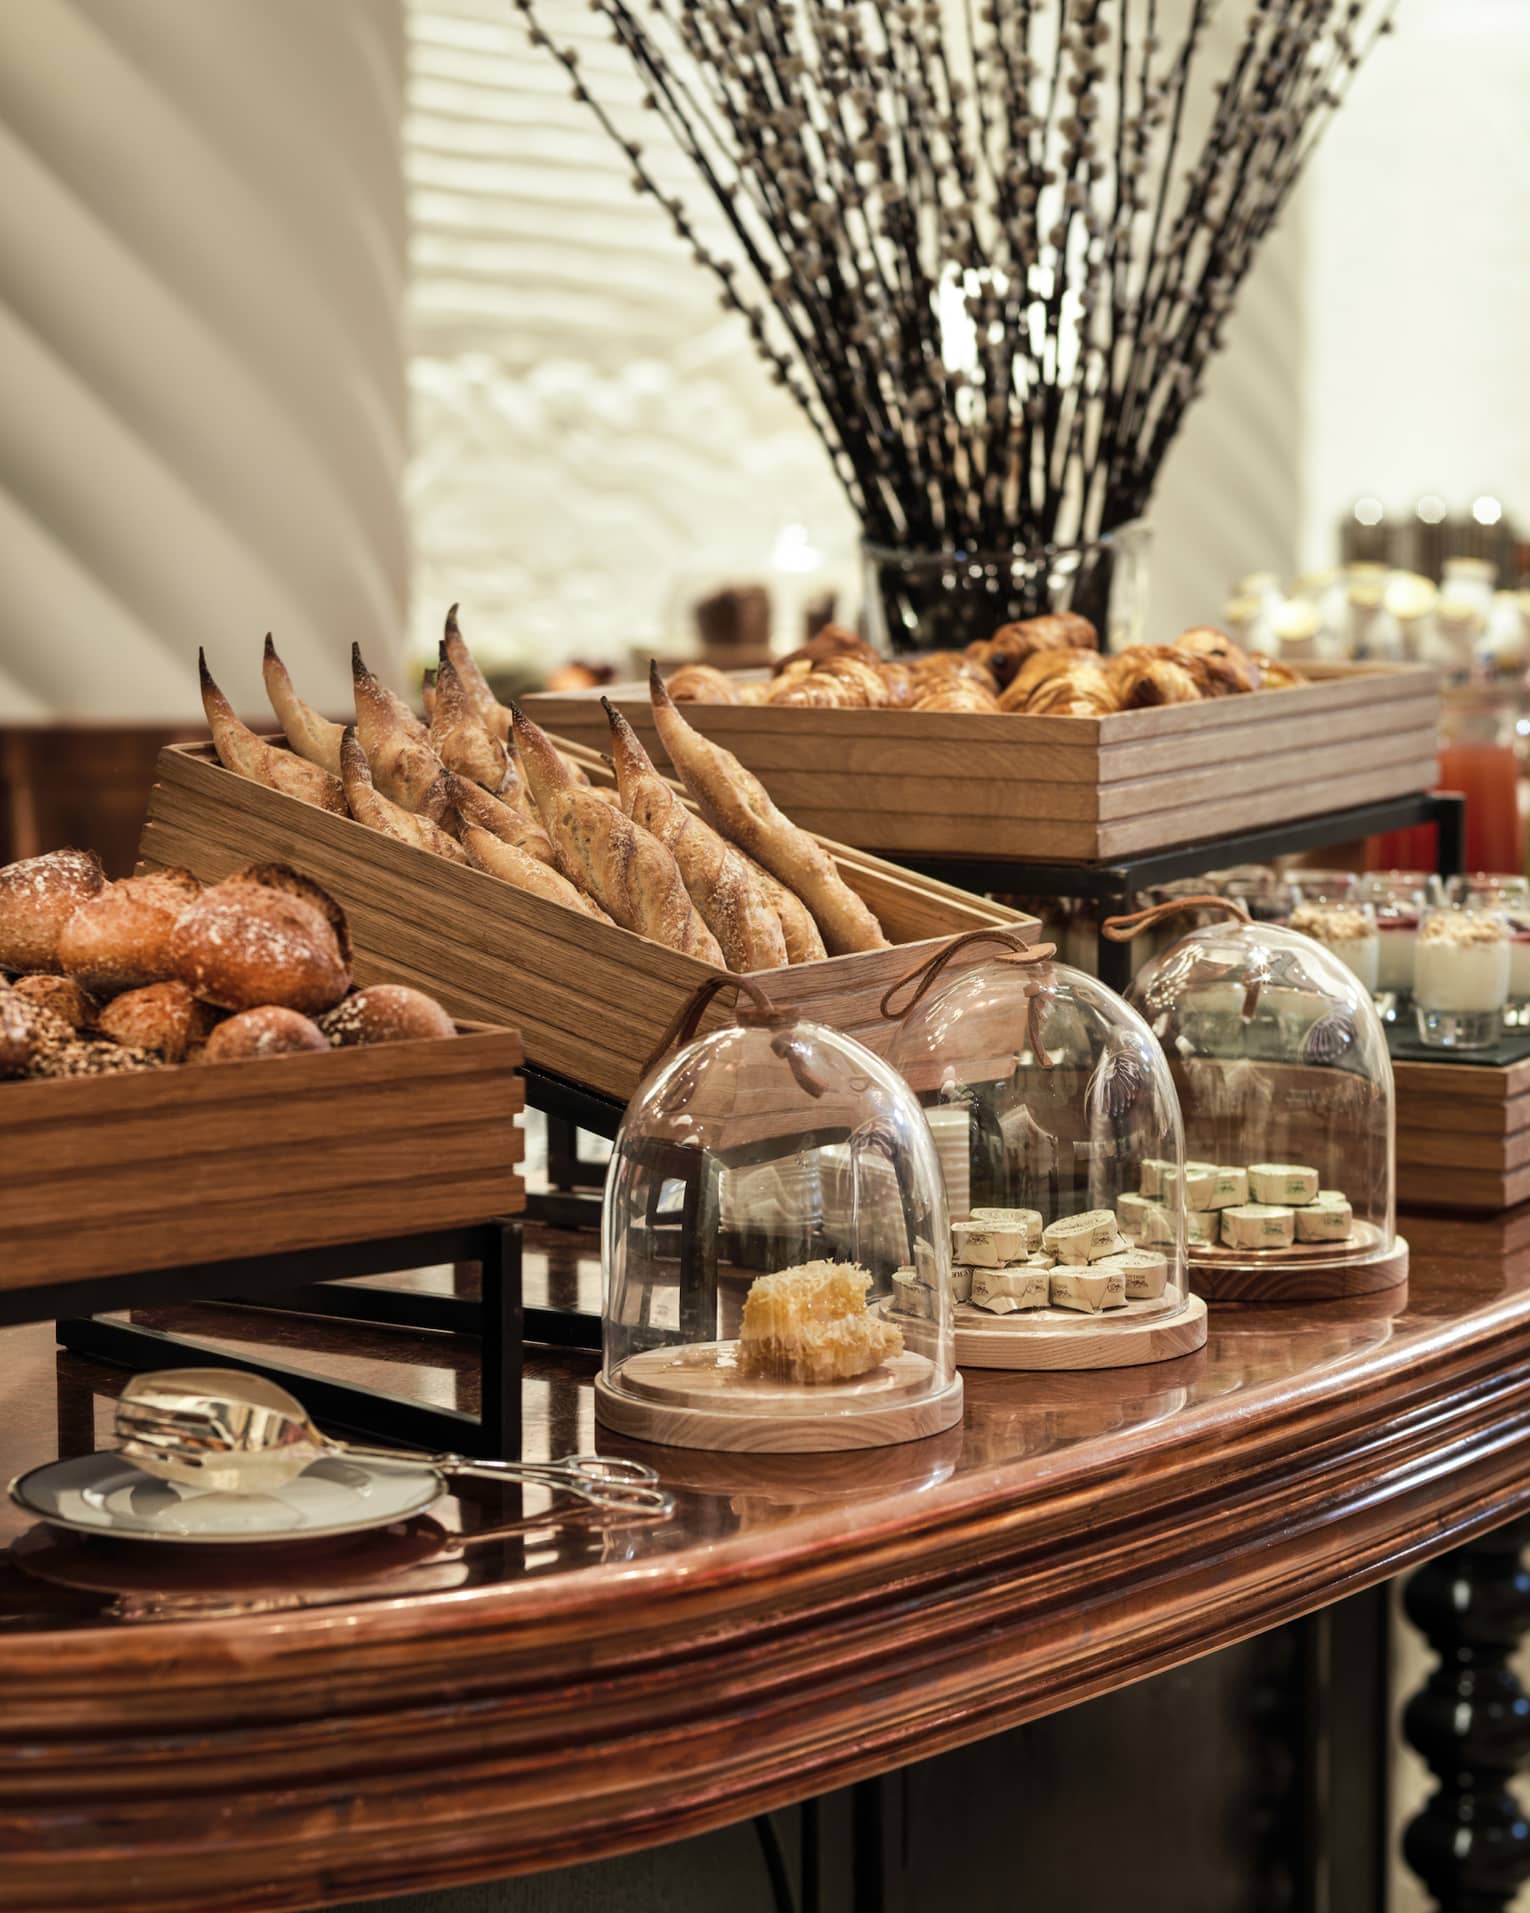 A decadent array of artisan breads and other baked goods in wooden crates and glass-covered dishes on a large wooden table.